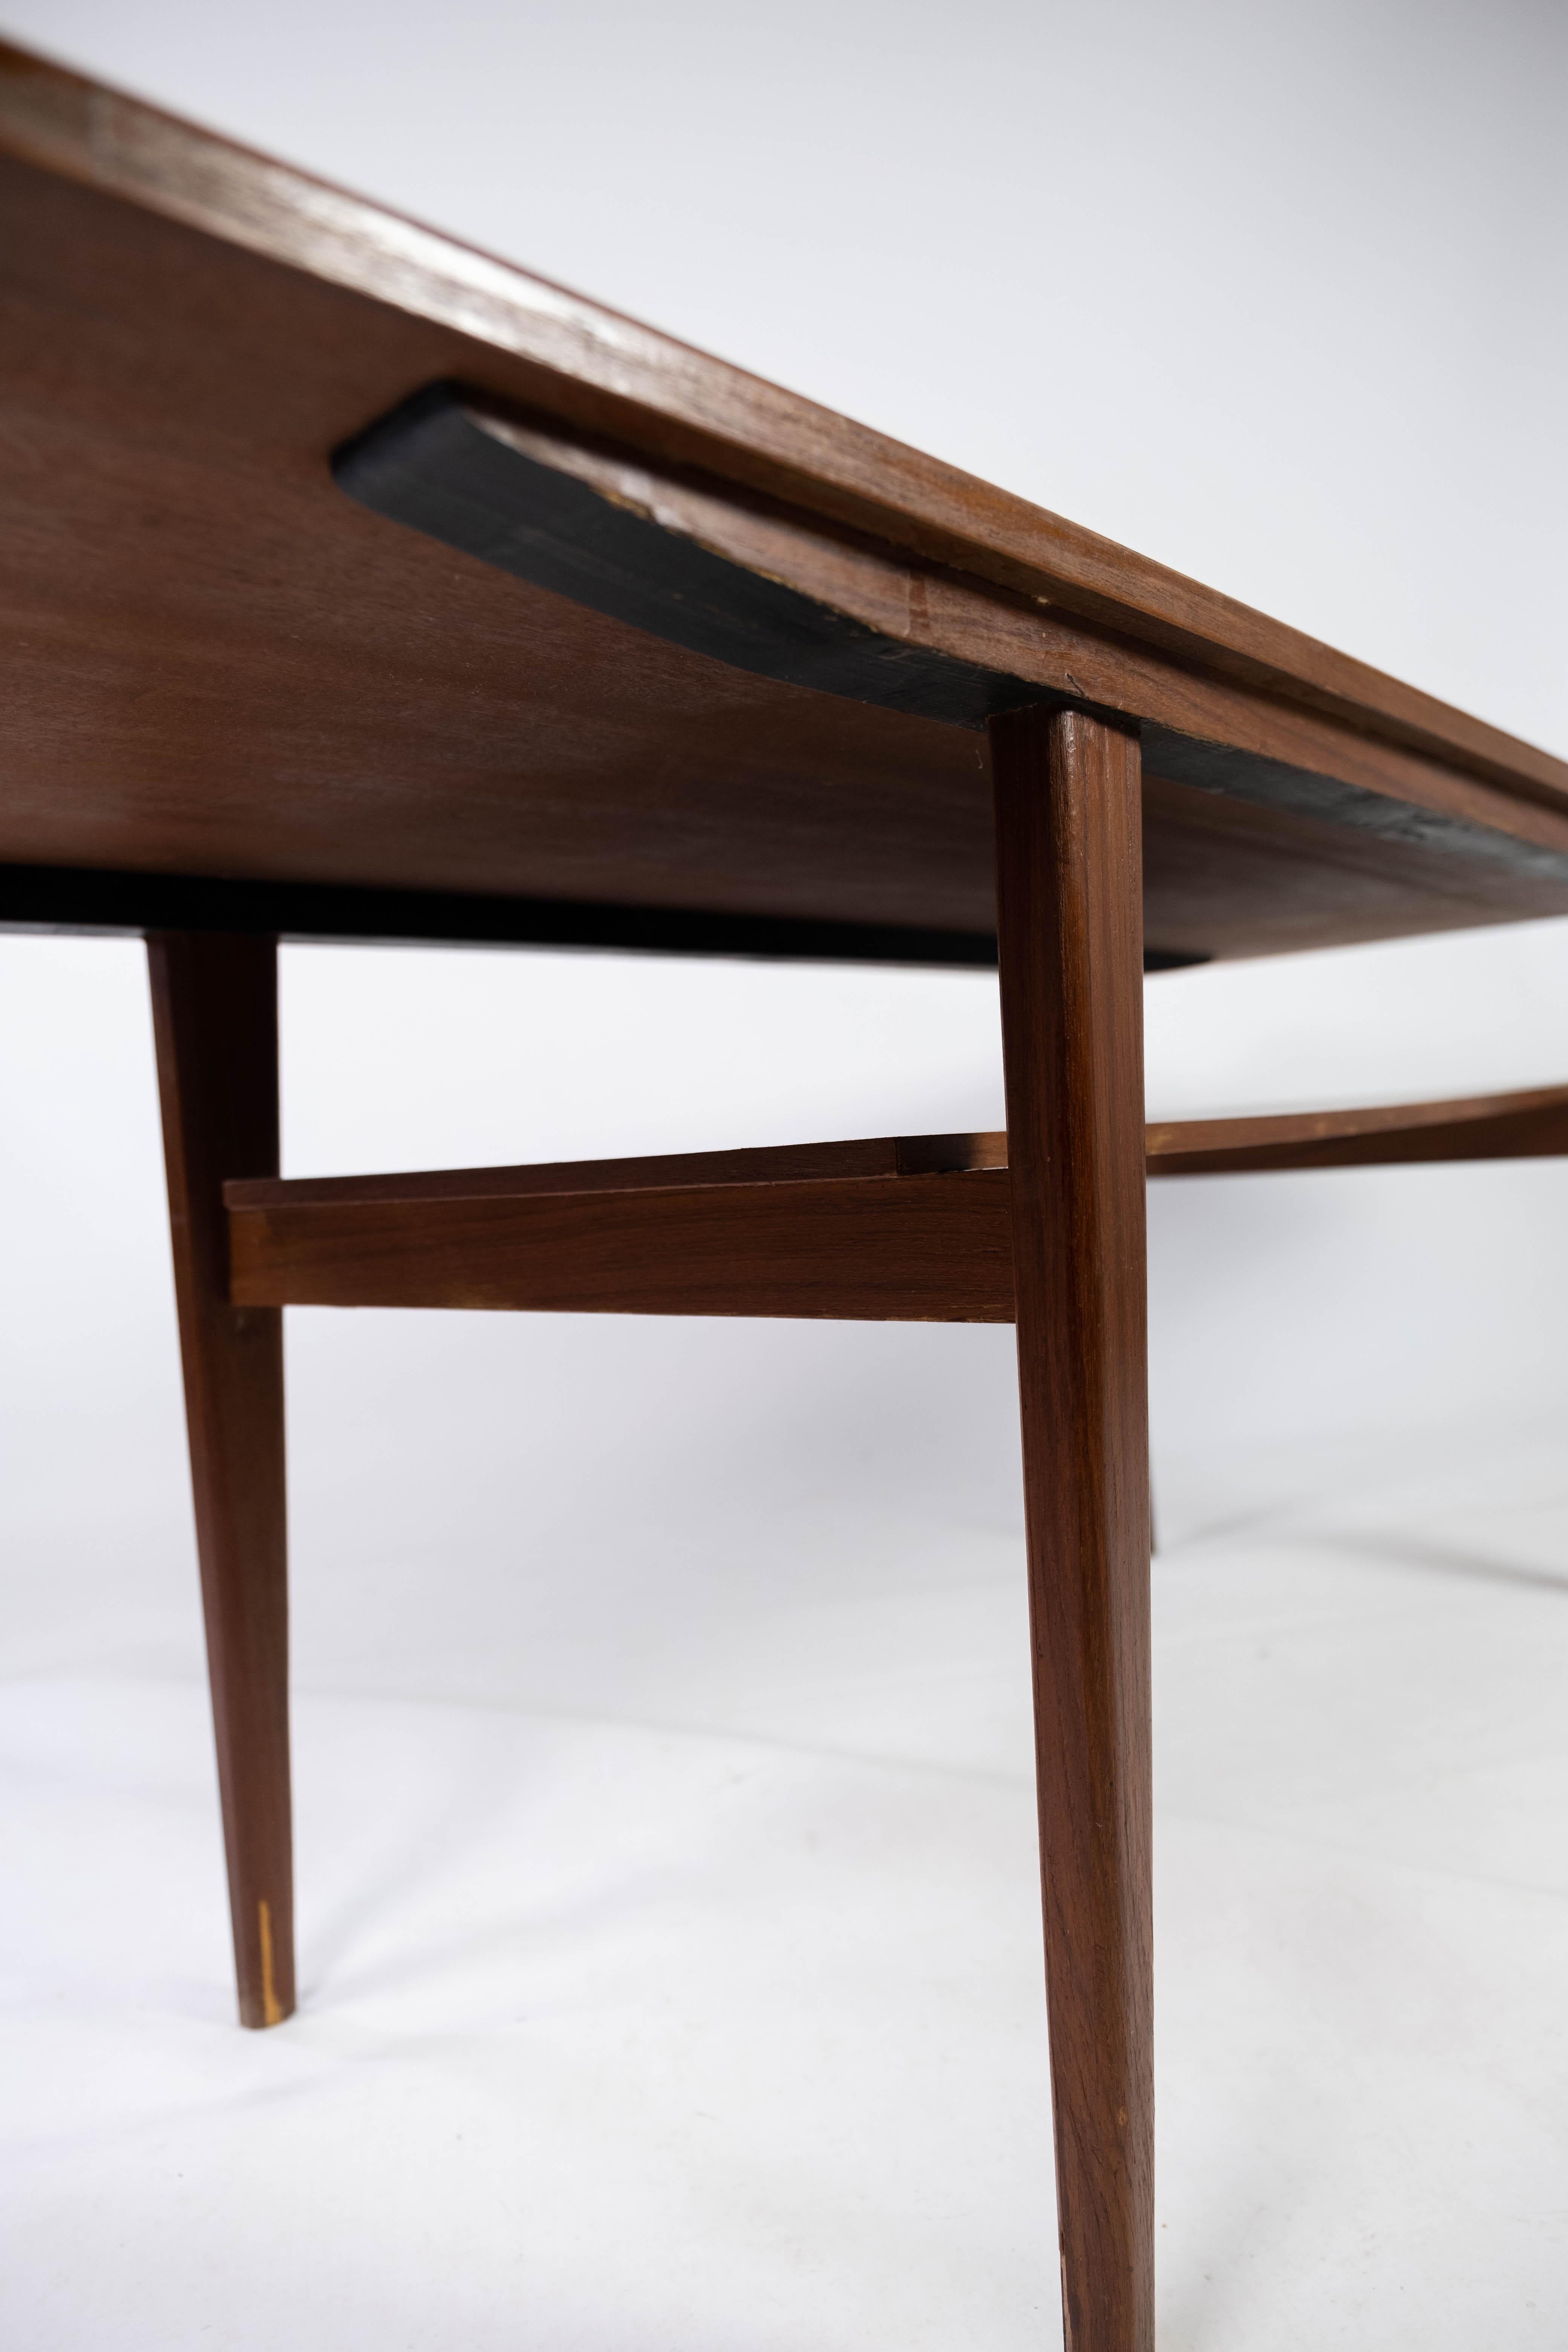 Coffee Table Made In Teak With Shelf, Danish Design From 1960s For Sale 4